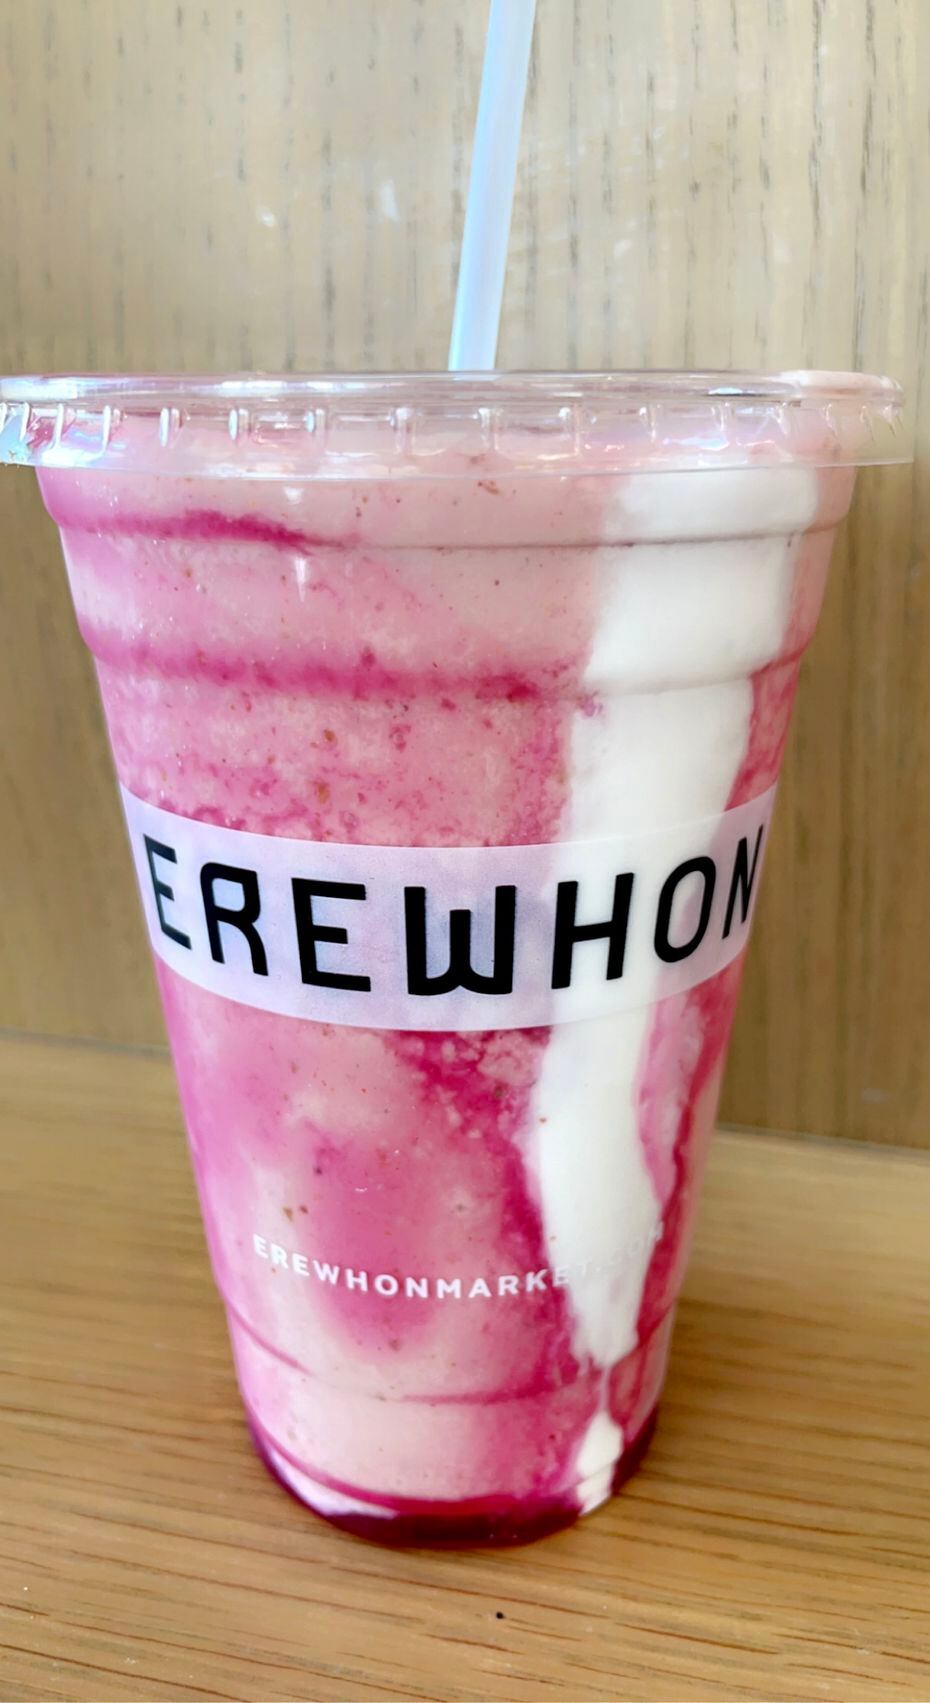 Hailey Beiber's Strawberry Glaze Skin Smoothie was as delicious as it looks.